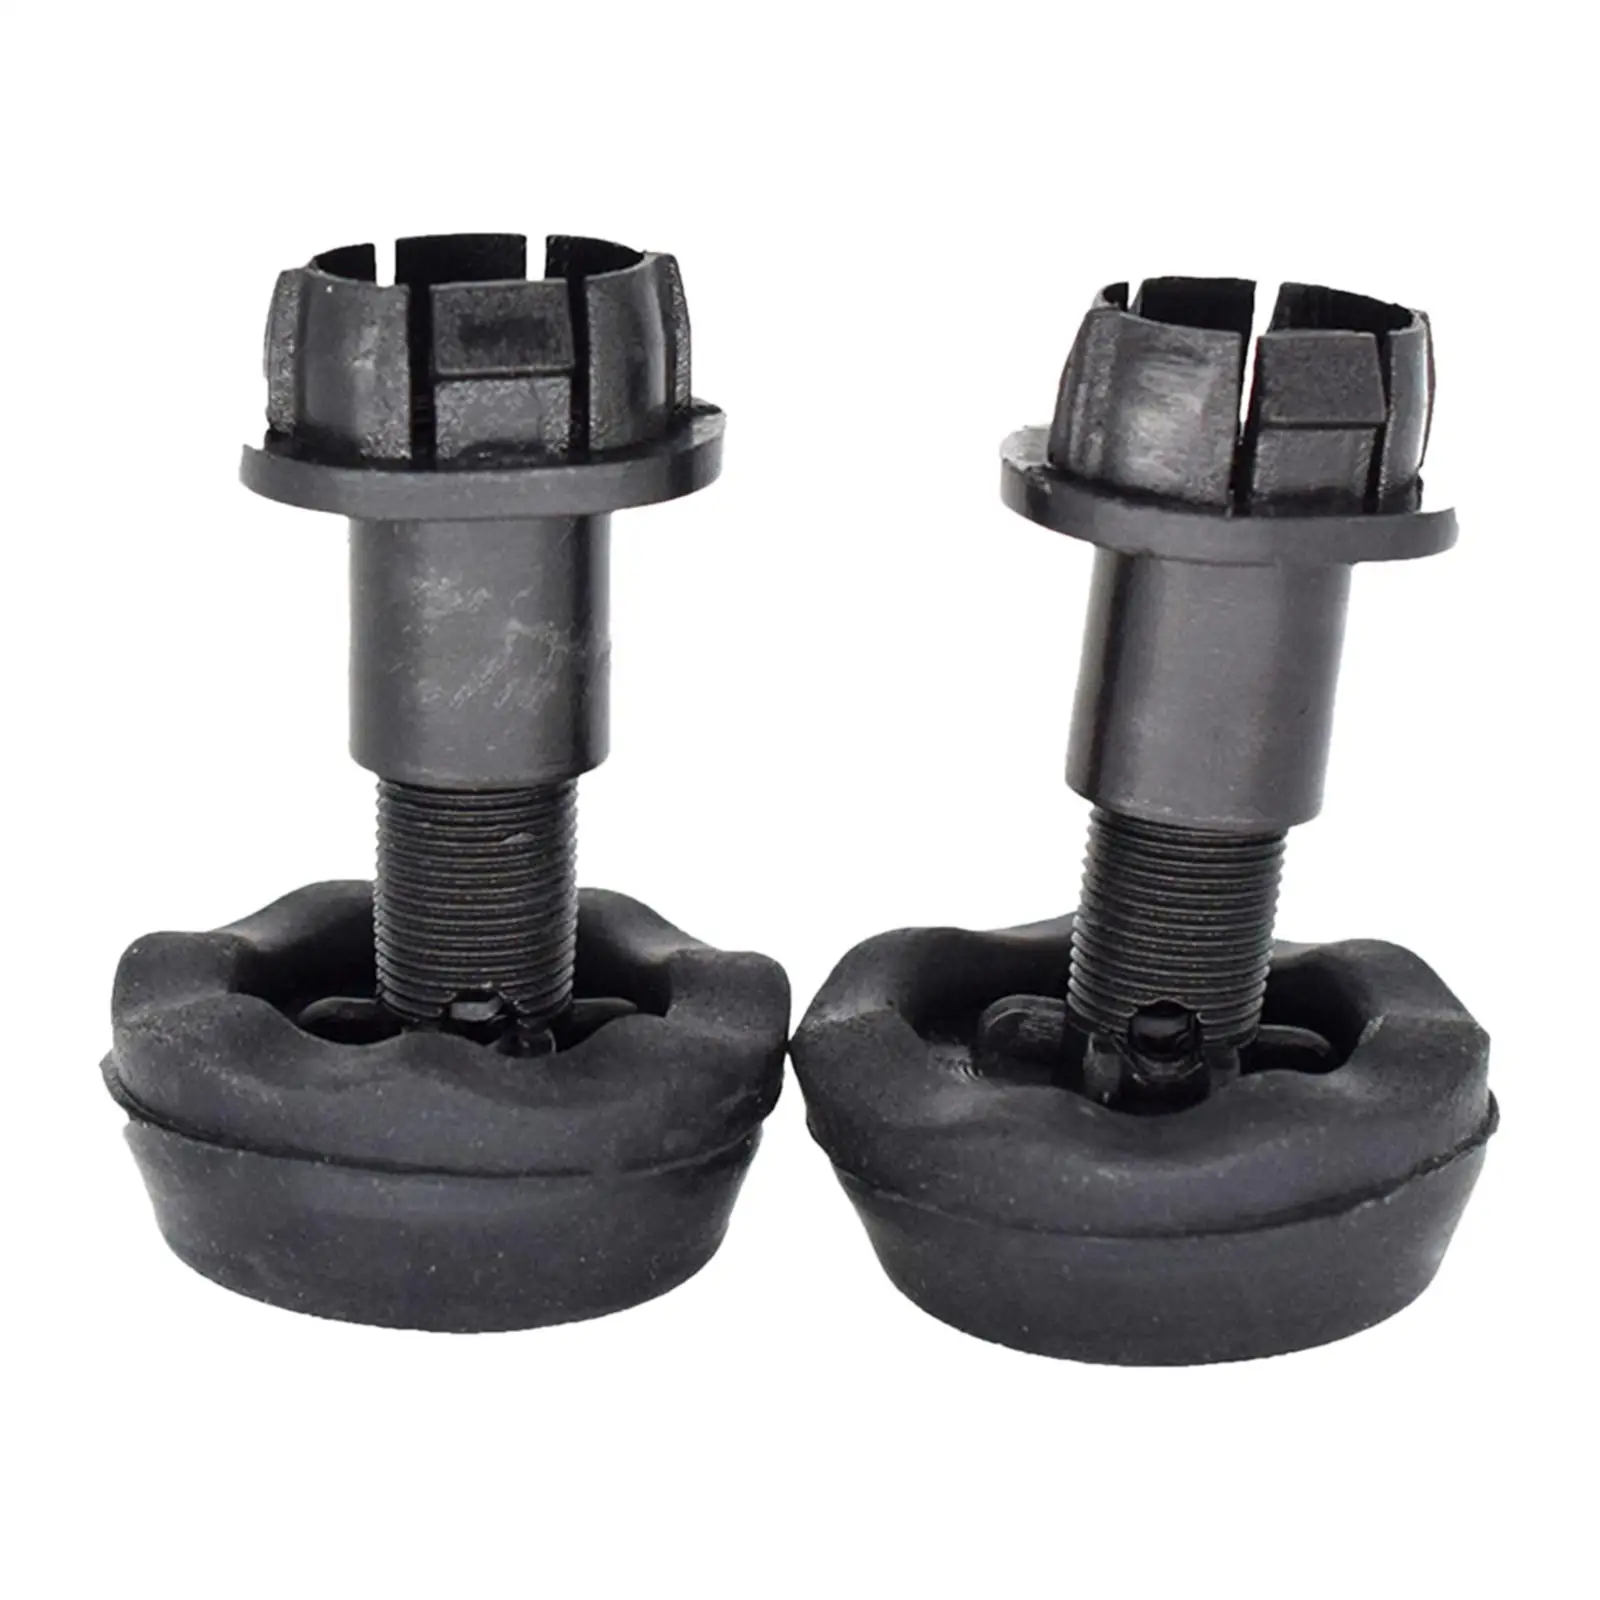 

2Pcs Automotive Engine Cover Buffer Stop Stopper Cushion Direct Replaces Spacers Repair Accessory for Lincoln Mkc 2015-2019